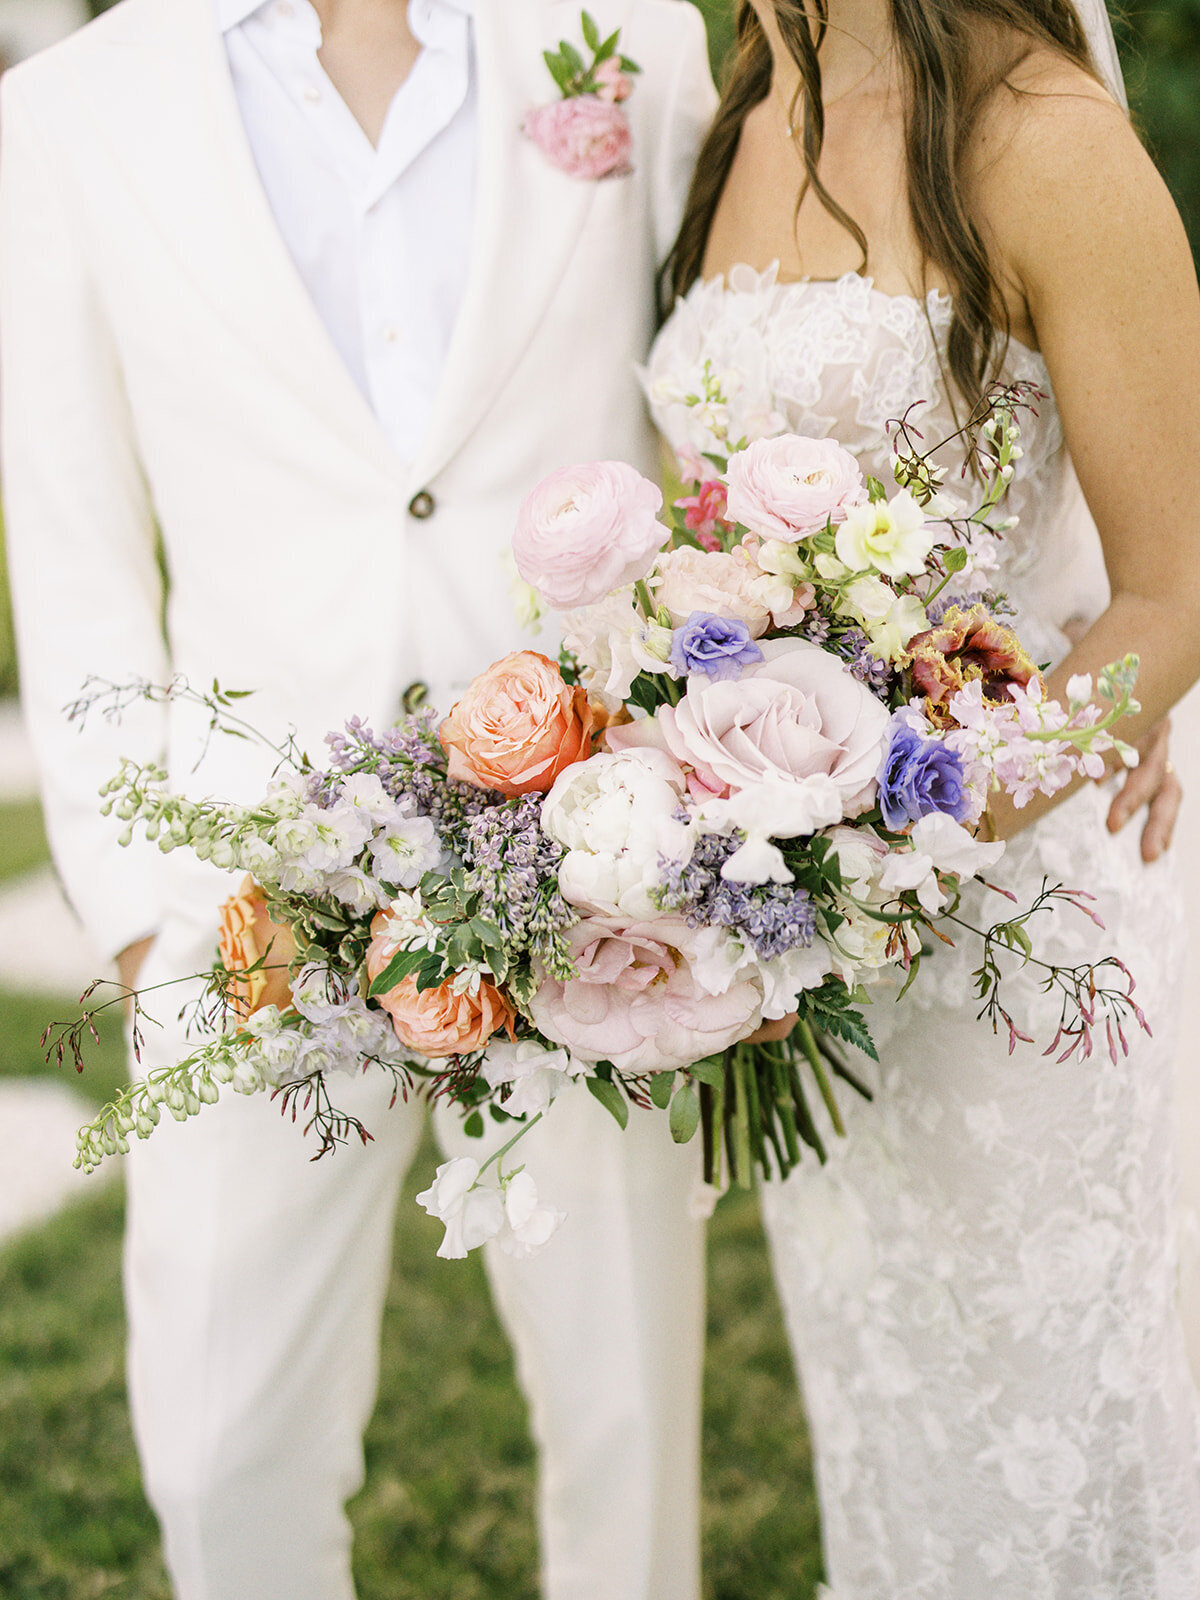 Lush floral heavy bridal bouquet for tropical destination wedding in Exuma, Bahamas. Bouquet in colors of peach, lavender, blush, cream, orange, and pale yellow. Private estate beach wedding. Destination floral design by Rosemary & Finch Floral Design.